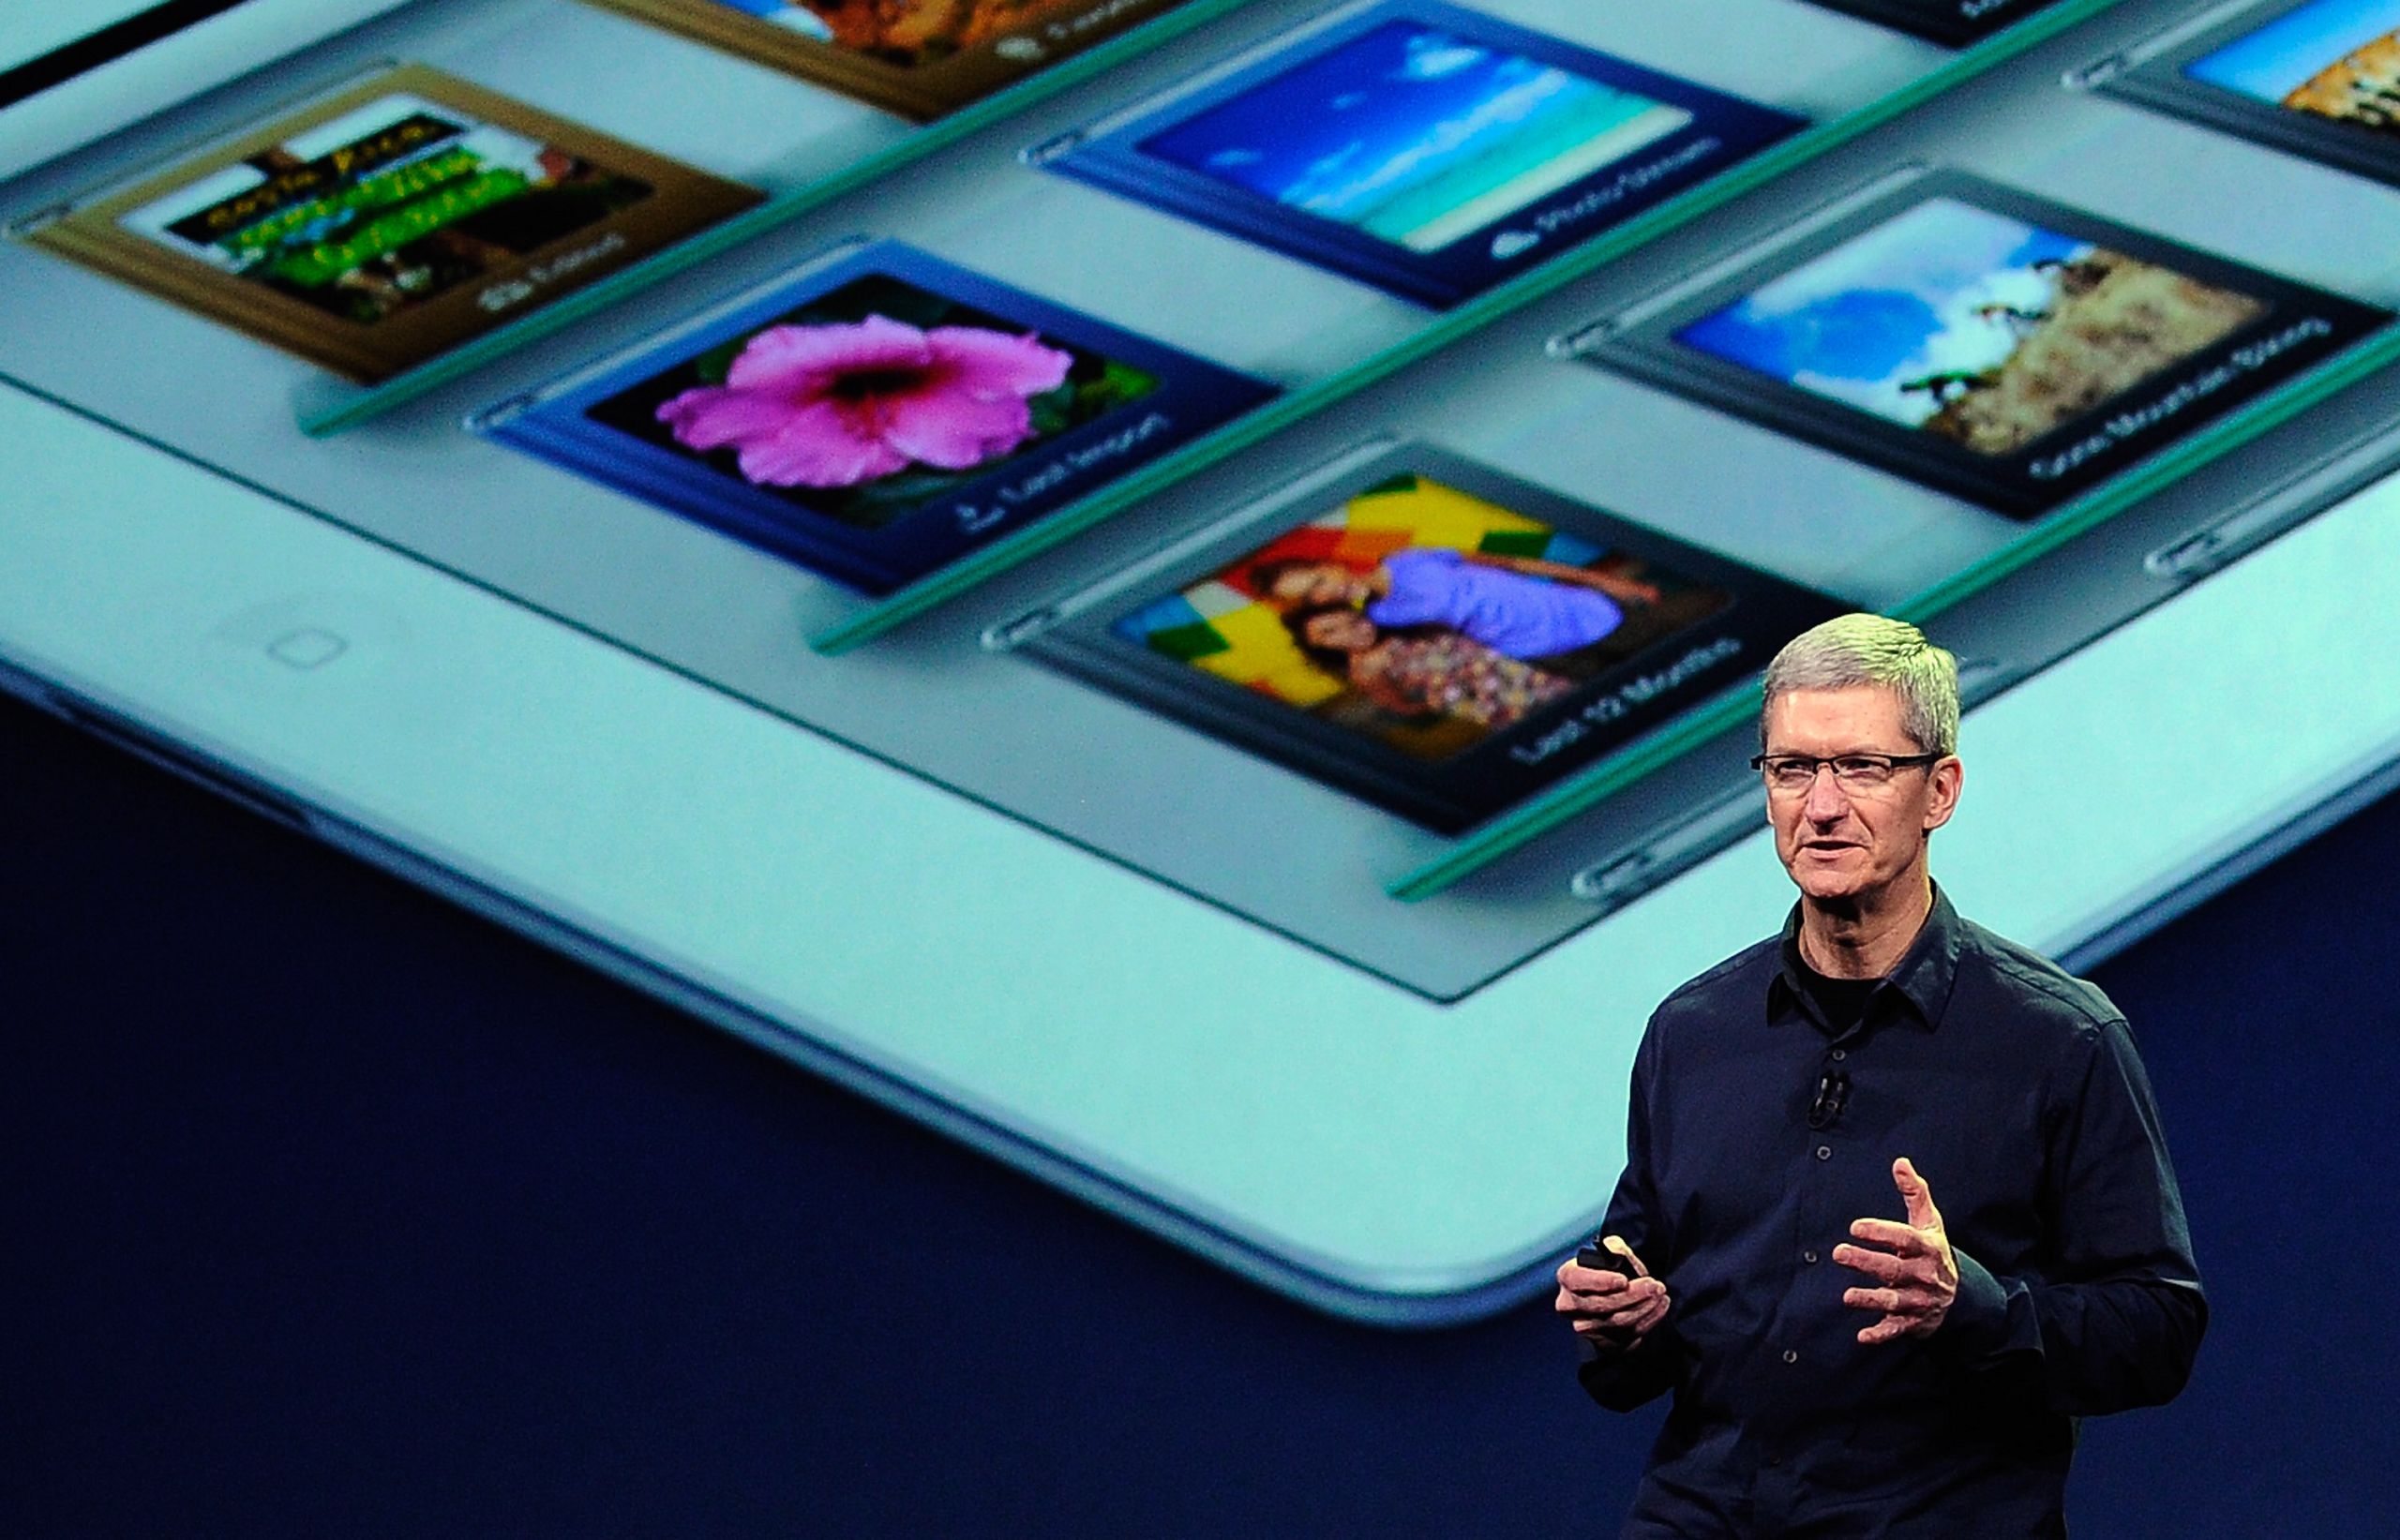 Tim Cook Apples CEO for Technology Presentations backgrounds